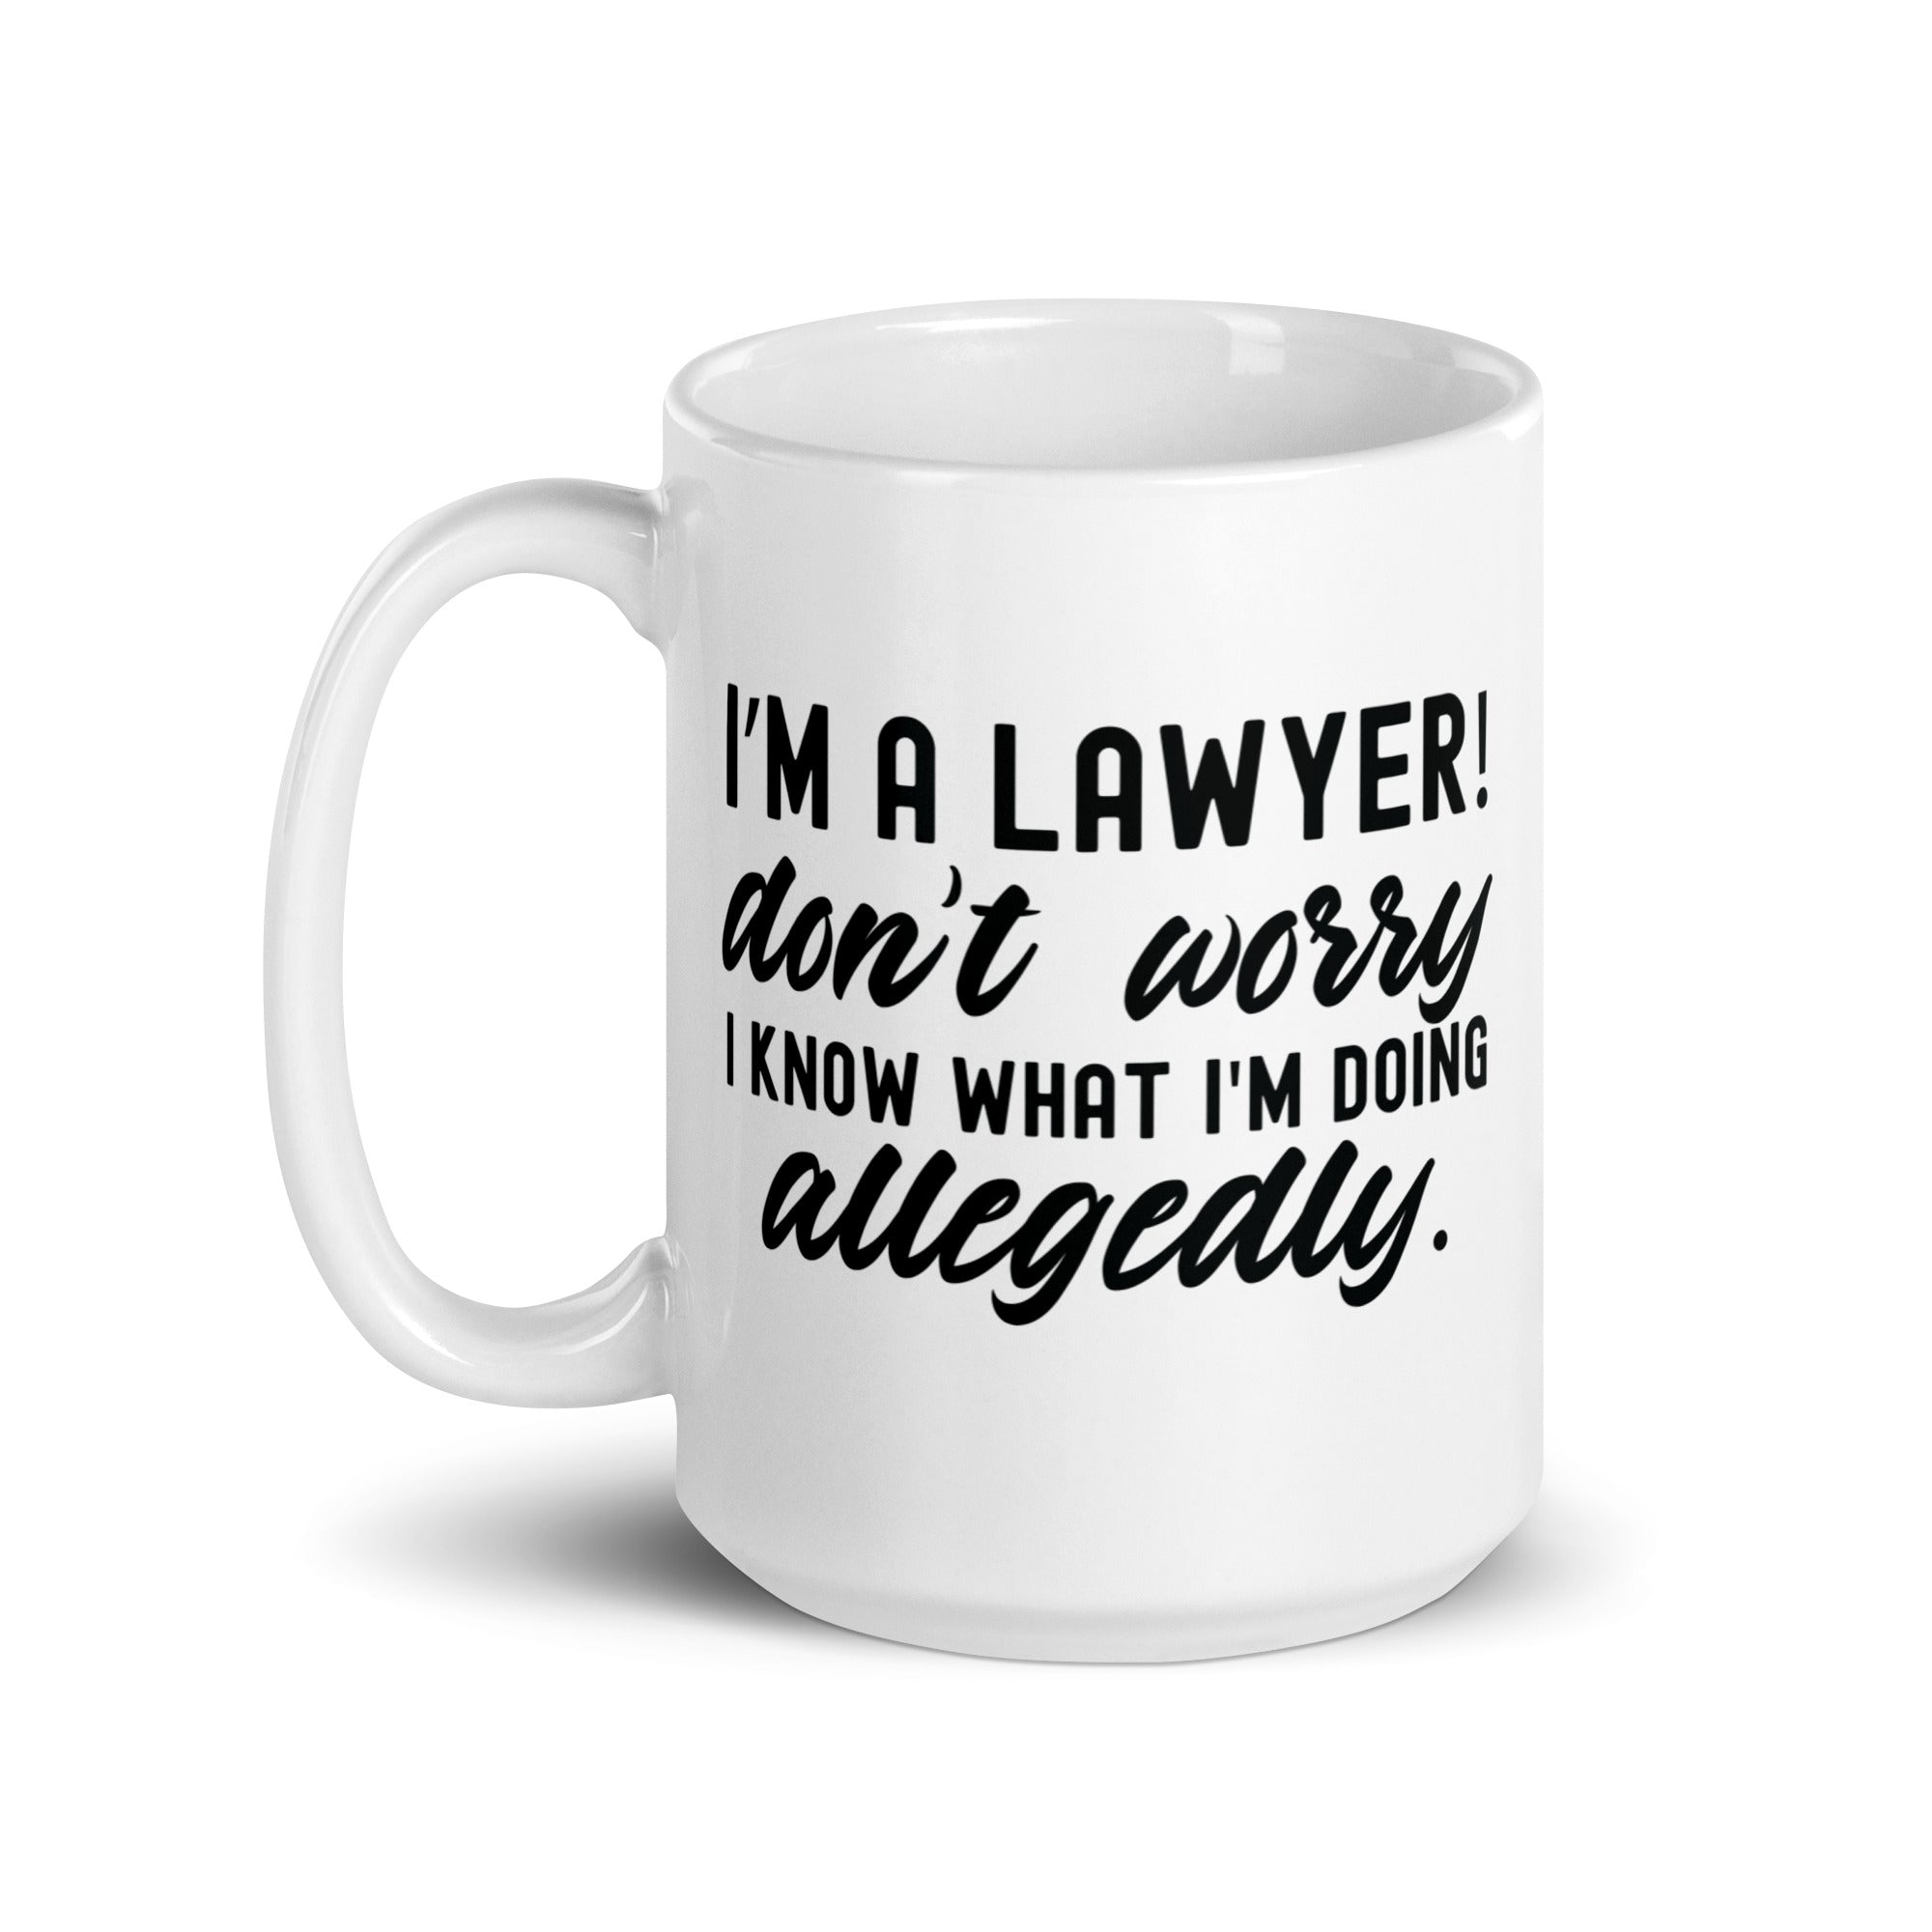 White glossy mug |  I’m a lawyer don’t worry I know what I'm doing (allegedly)